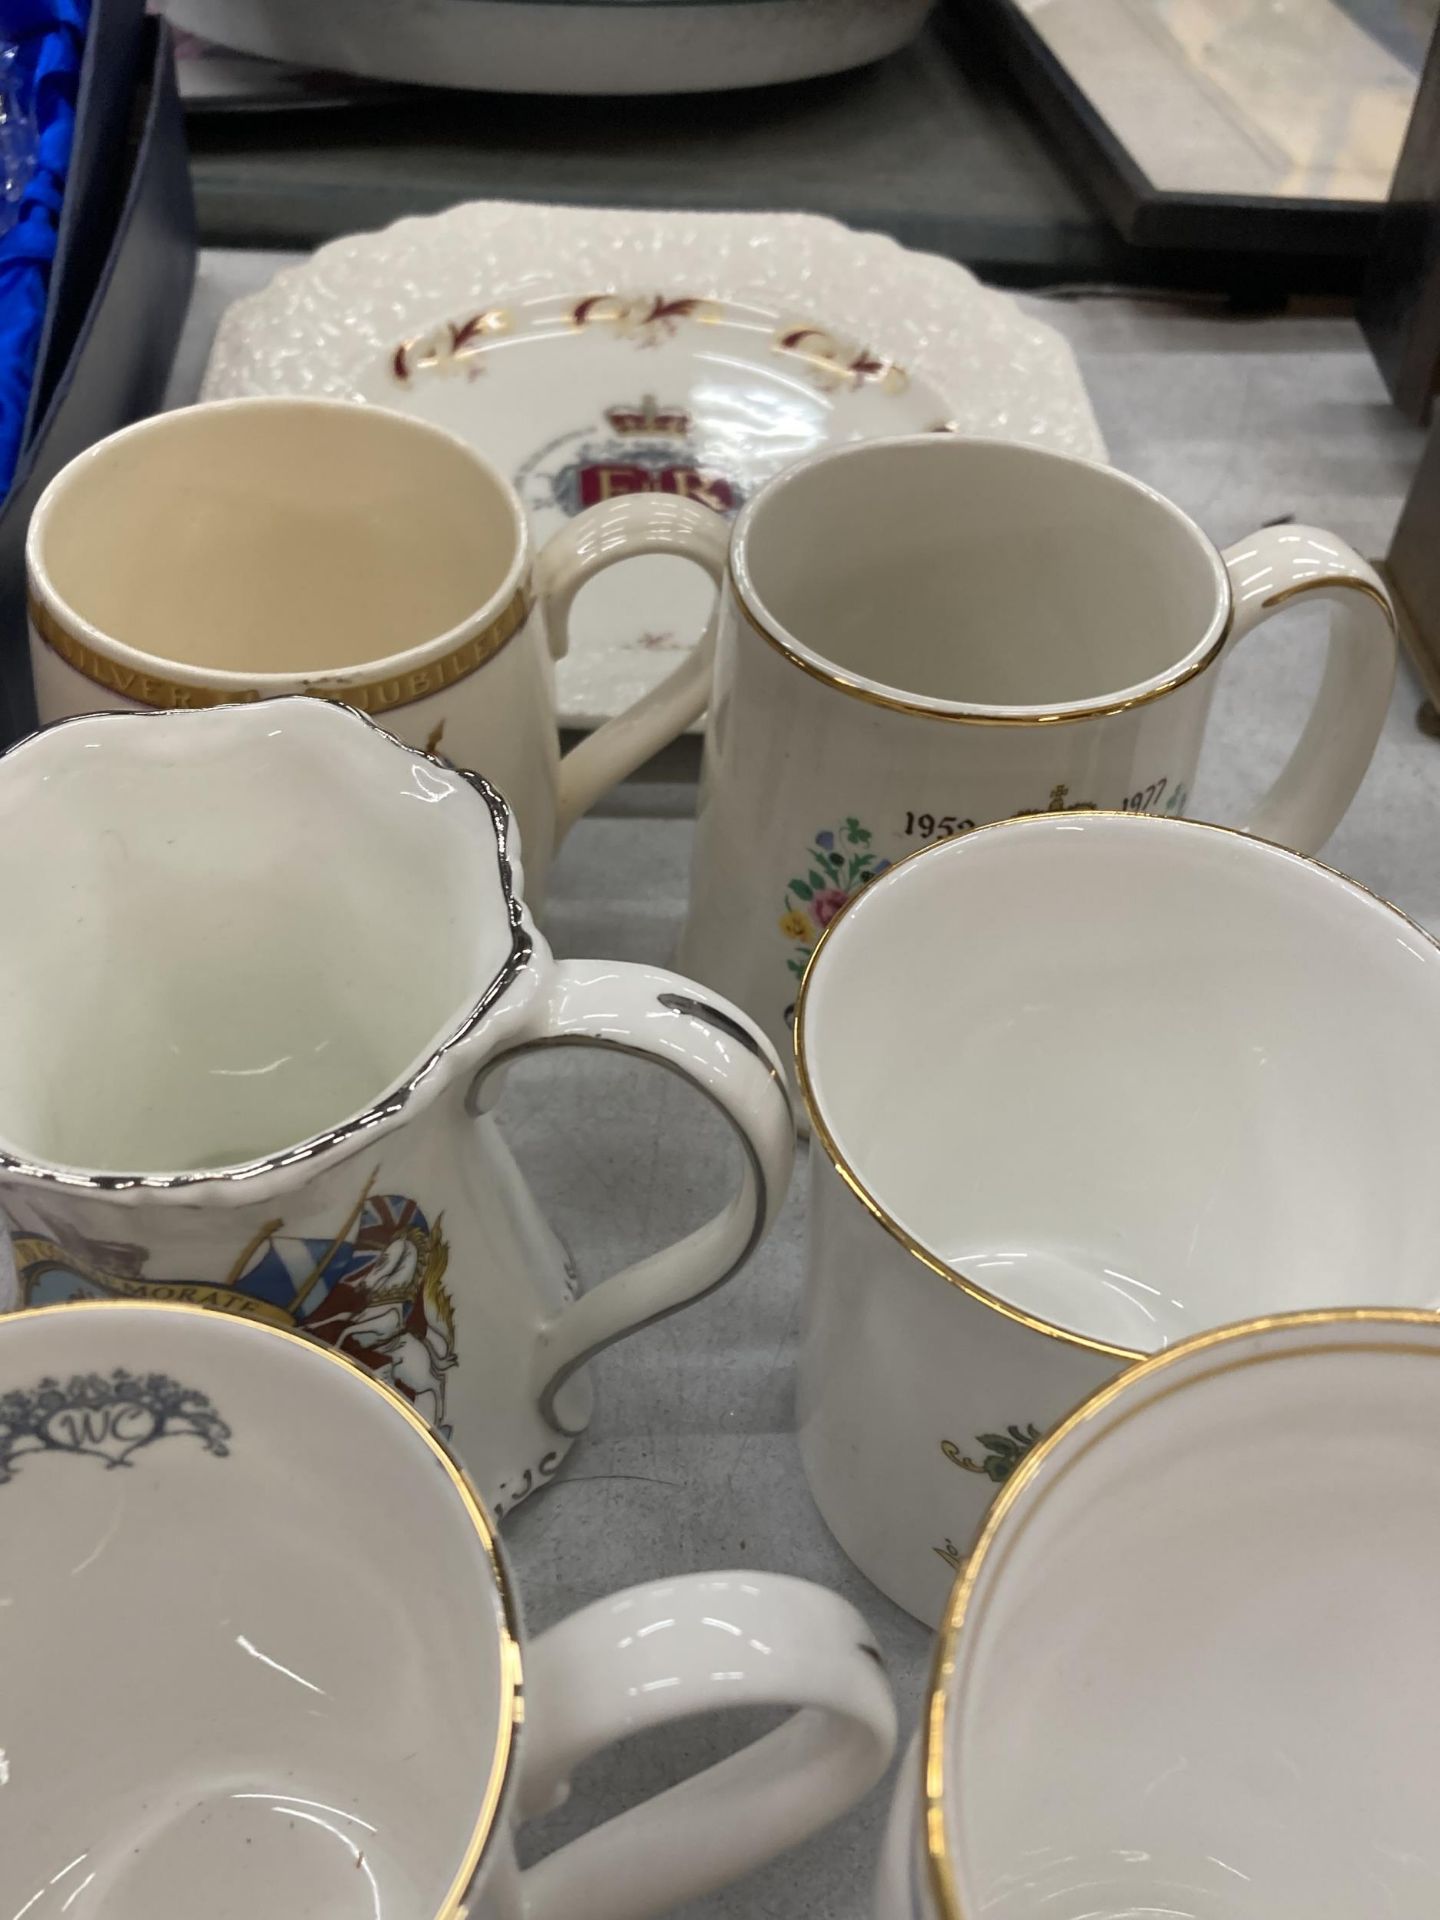 A COLLECTION OF ROYAL COMMEMORATIVE MUGS AND CUPS PLUS A PLATE - Image 3 of 3